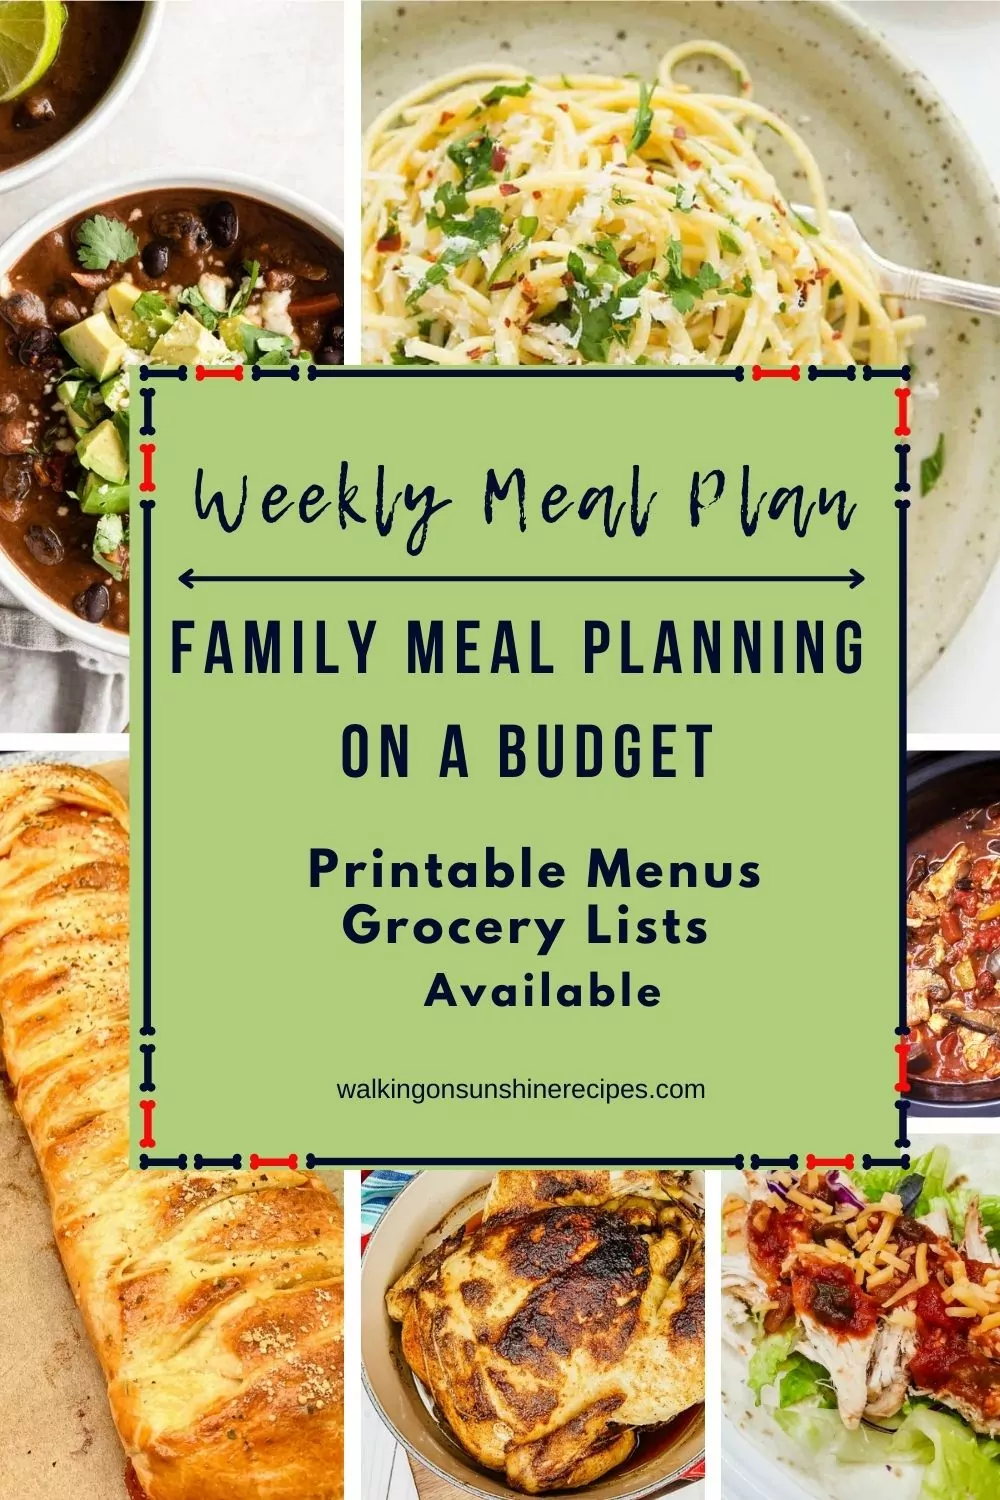 7 recipes with tips for Family Meal Planning on a Budget.